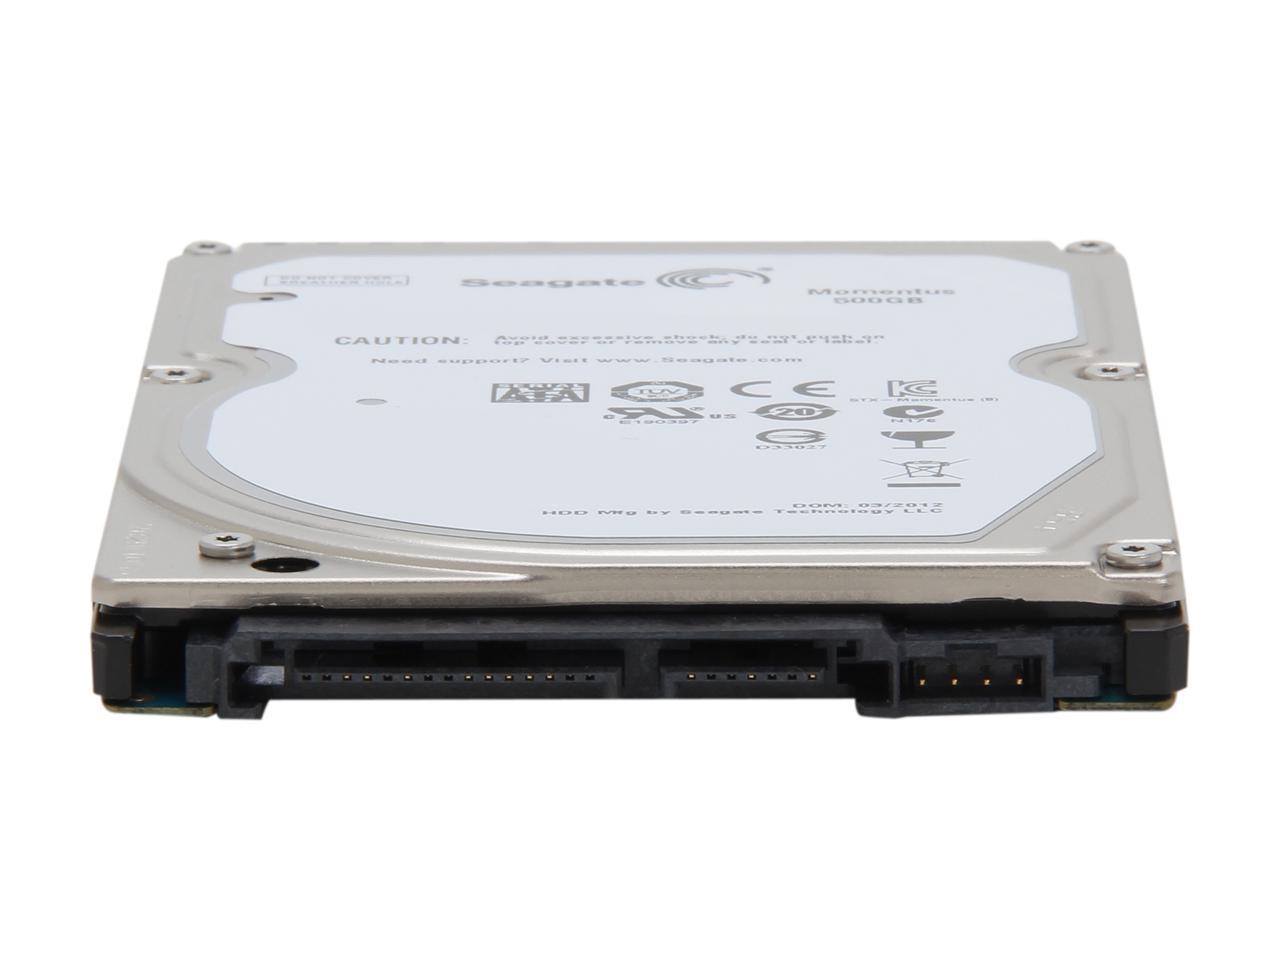 Seagate Momentus 7200.4 ST9500423AS 500GB 7200 RPM 16MB 